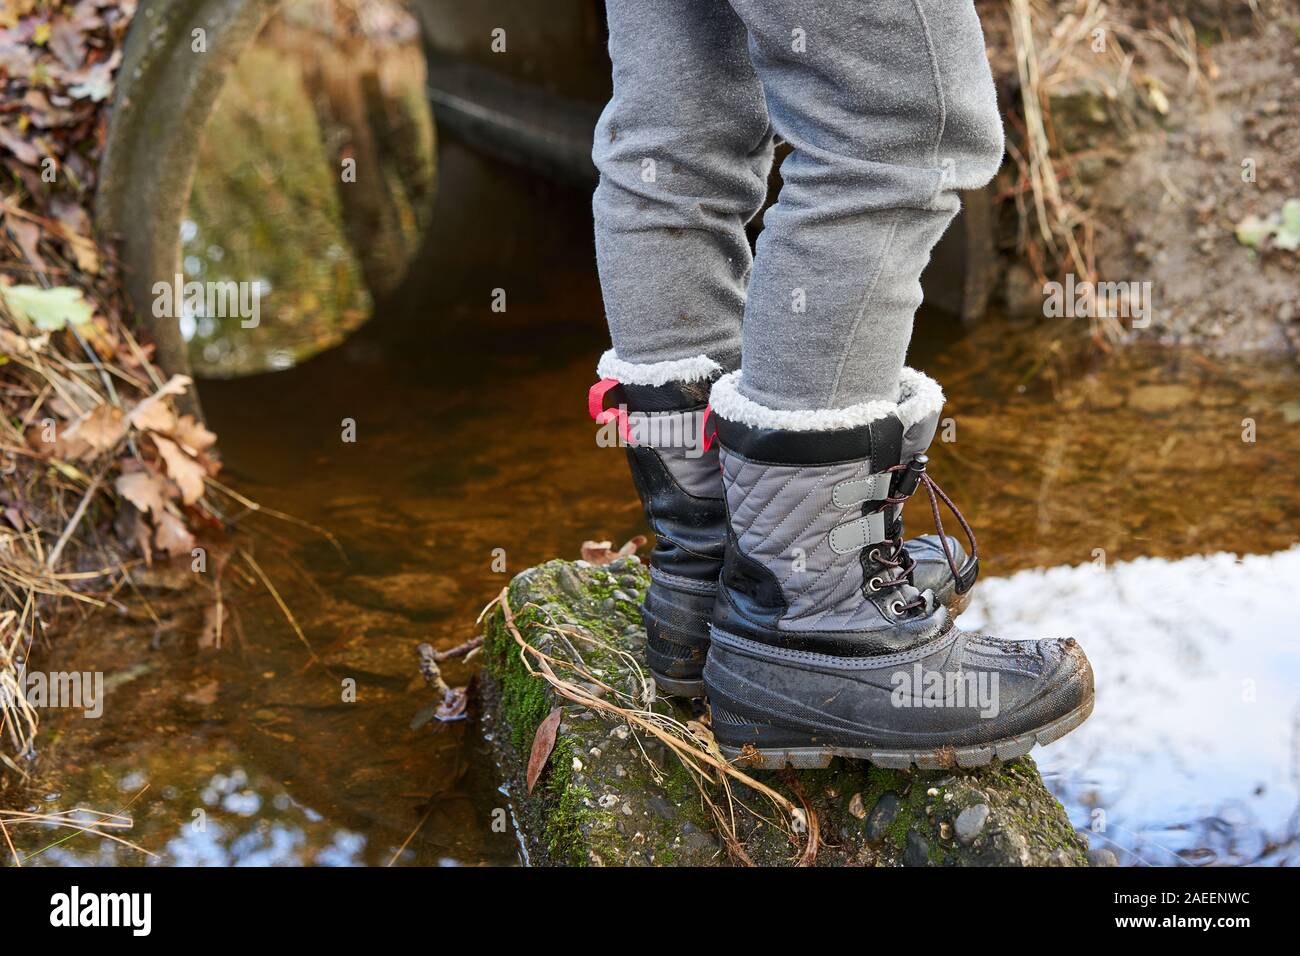 Legs of a boy in grey pants and winter boots standing on a rock in a creek in a local park on a cool autumn day in Windsor, California. Stock Photo